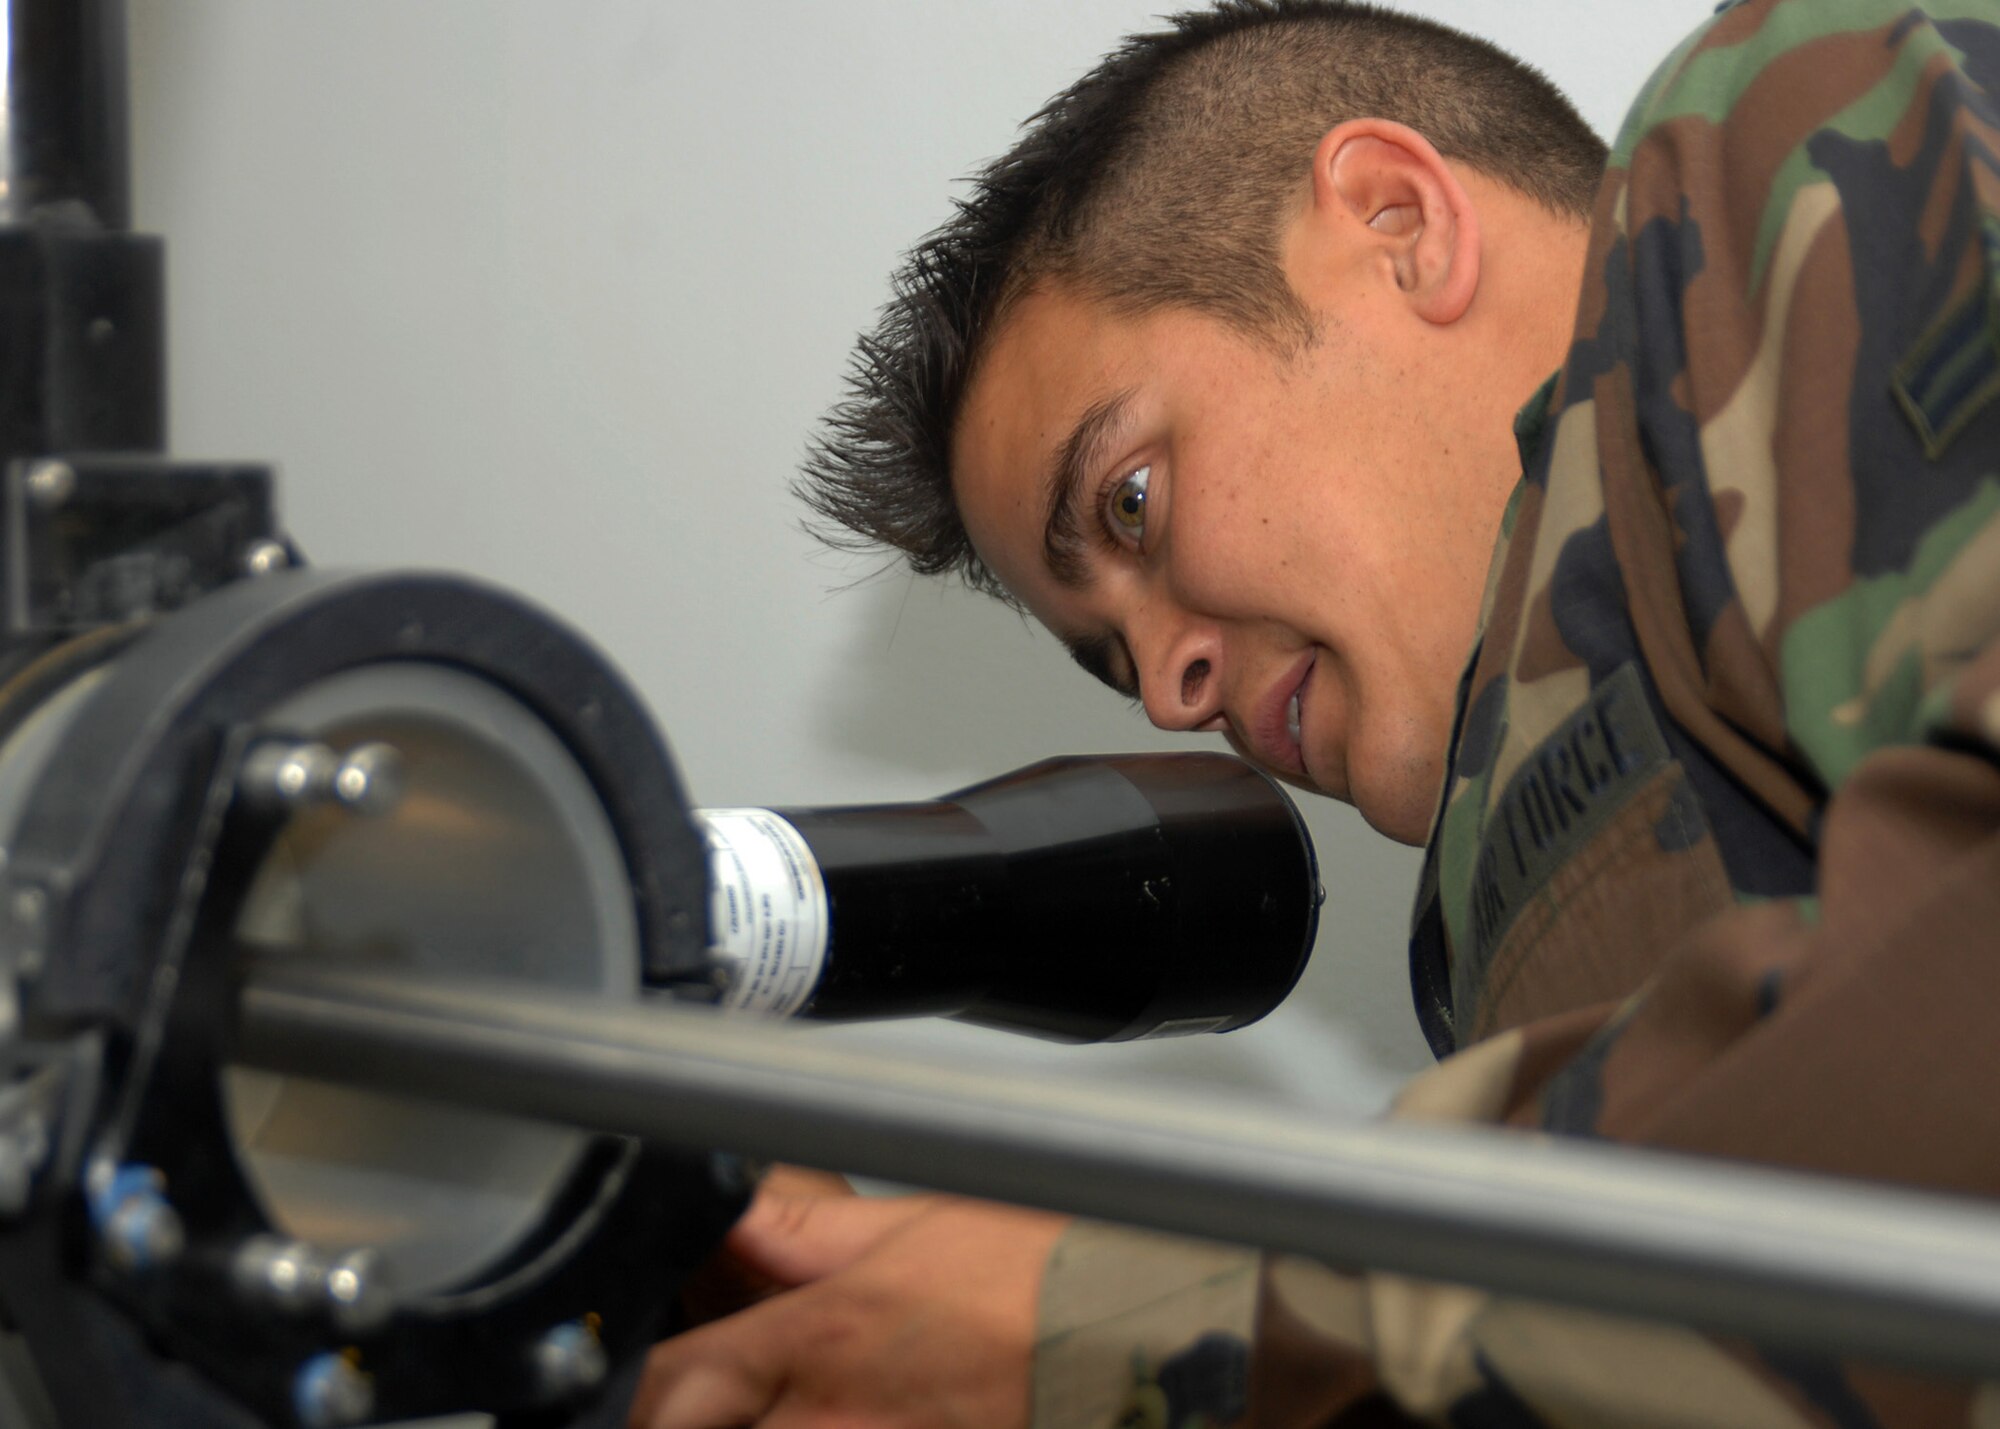 SEYMOUR JOHNSON AIR FORCE BASE, N.C. - Airman 1st Class Chris Boatright of the 4th Component Maintenance Squadron's Precision Measurement Equipment Lab calibrates the Guidance Control Section, June 19, 2008. Airman 1st Class Boatright uses precise measurements to ensure the missile guidance system can put bombs on target, on time. (U.S. Air Force photo by Airman 1st Class Makenzie Lang)